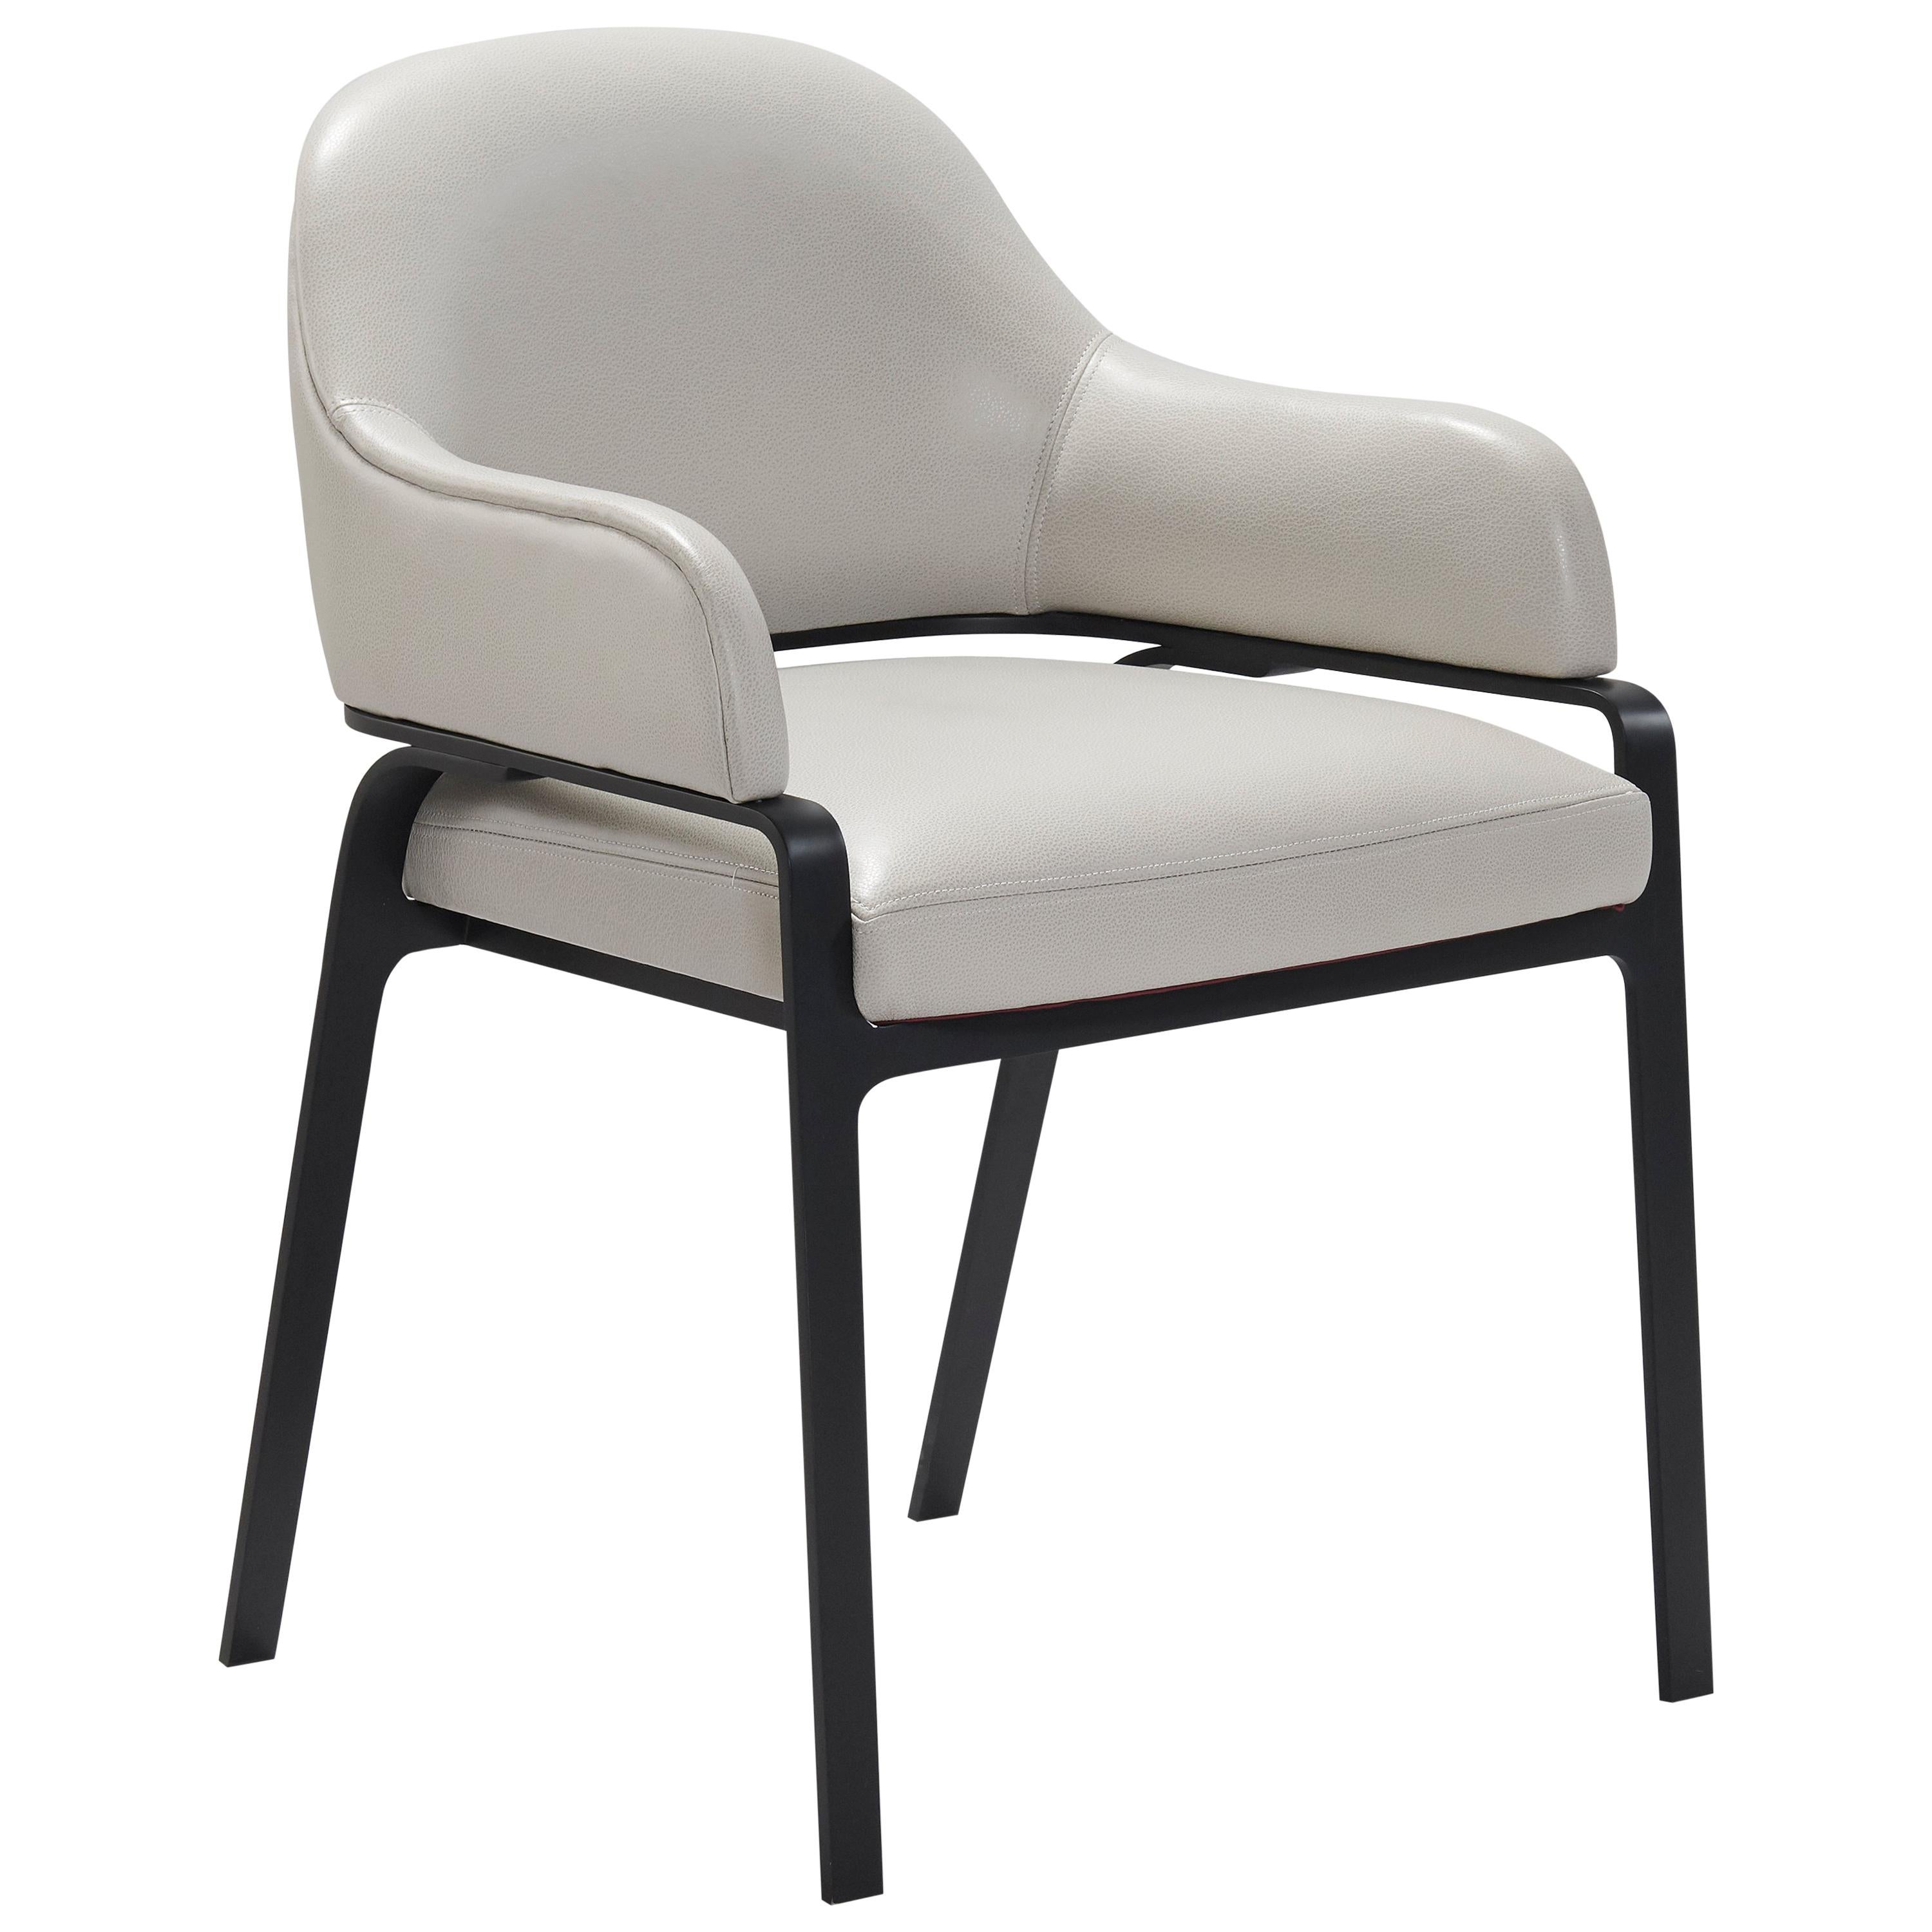 Gazelle Modern Dining Chair in AP Tipper Leather with Black Metal Steel Legs For Sale